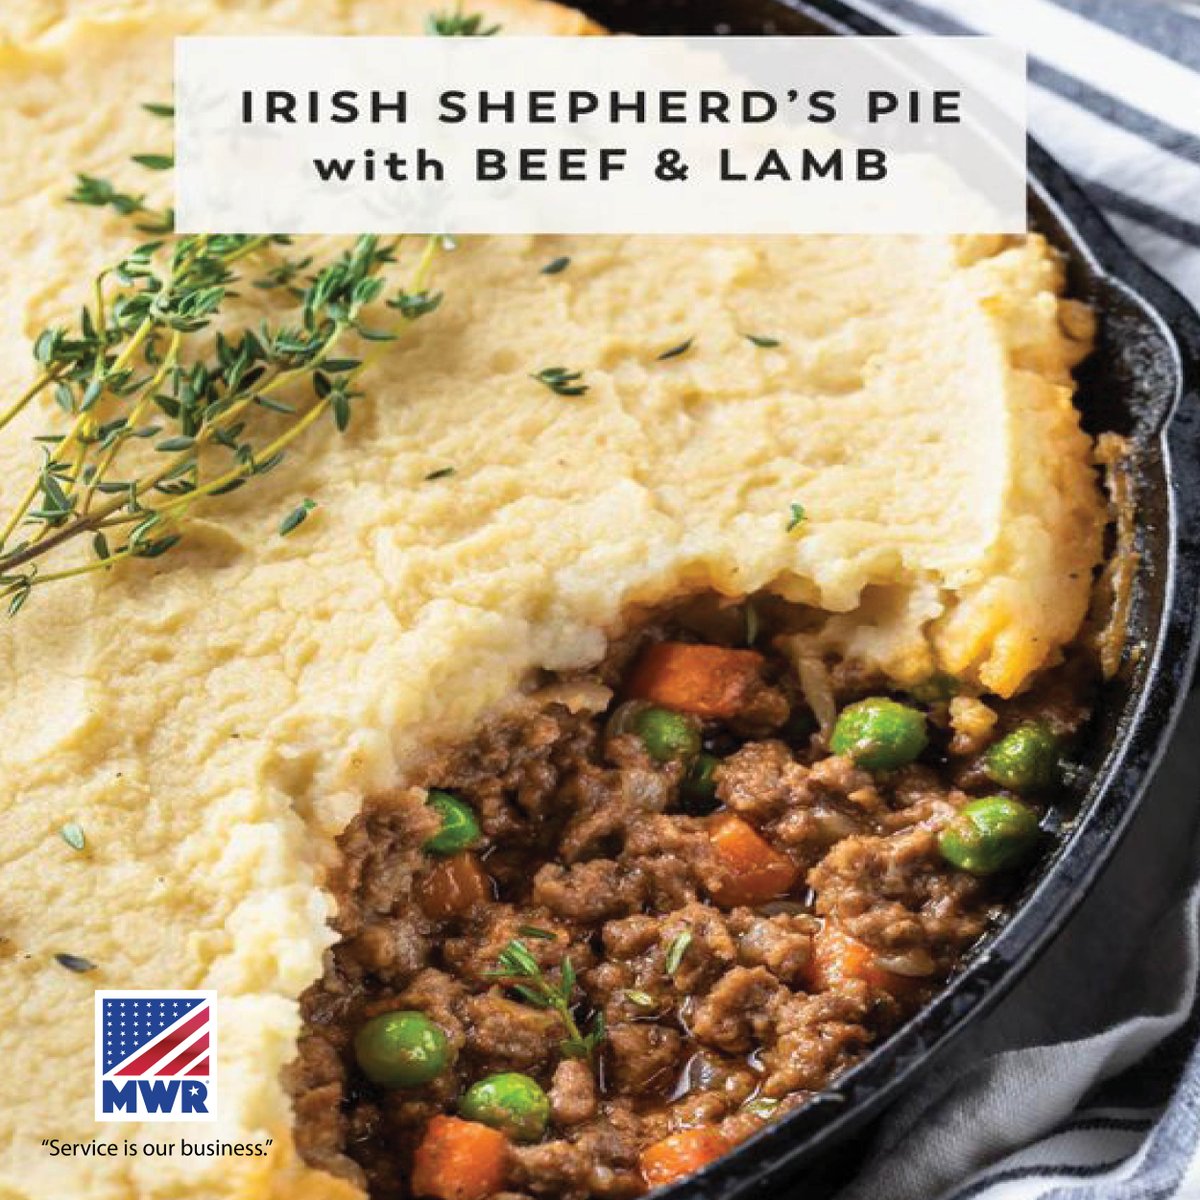 Enjoy a taste of Ireland this month and make a mouth-watering Shepherd's Pie. Find the recipe on our Pinterest board titled 'Try This!' Search @dlafmwrenterprise
#dlafmwrenterprise   #TriviaTuesday   #AuthenticIrish